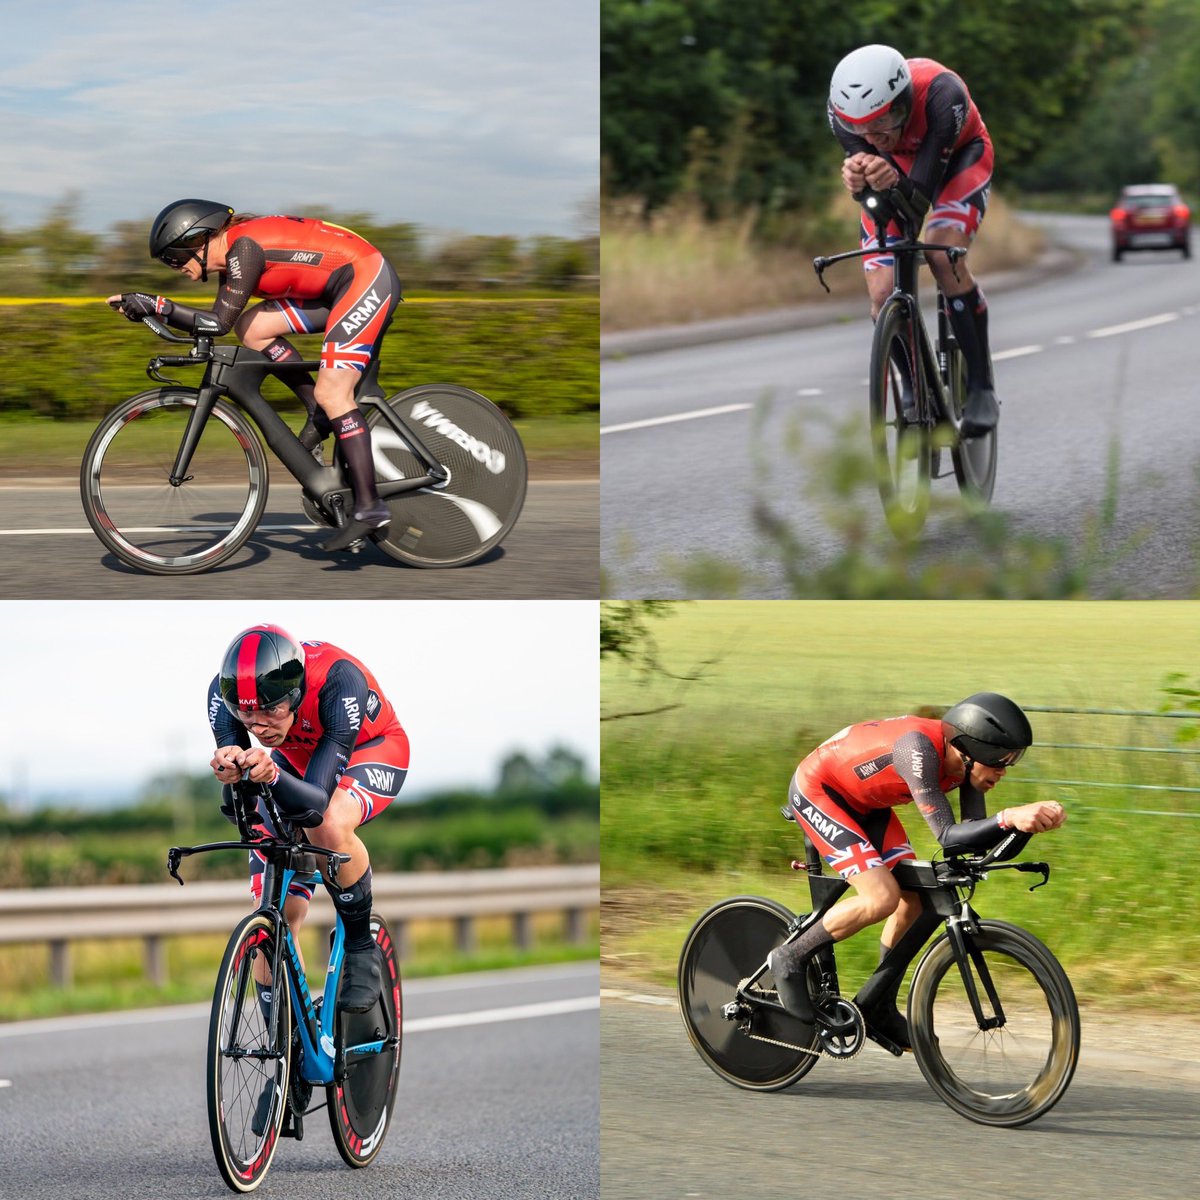 Good luck to the Time Trial team who are heading to the UKAF Inter Service TT Championships this weekend! 🚴🏼‍♀️💪🚴🏼‍♂️ #inspiringsoldierstocycle